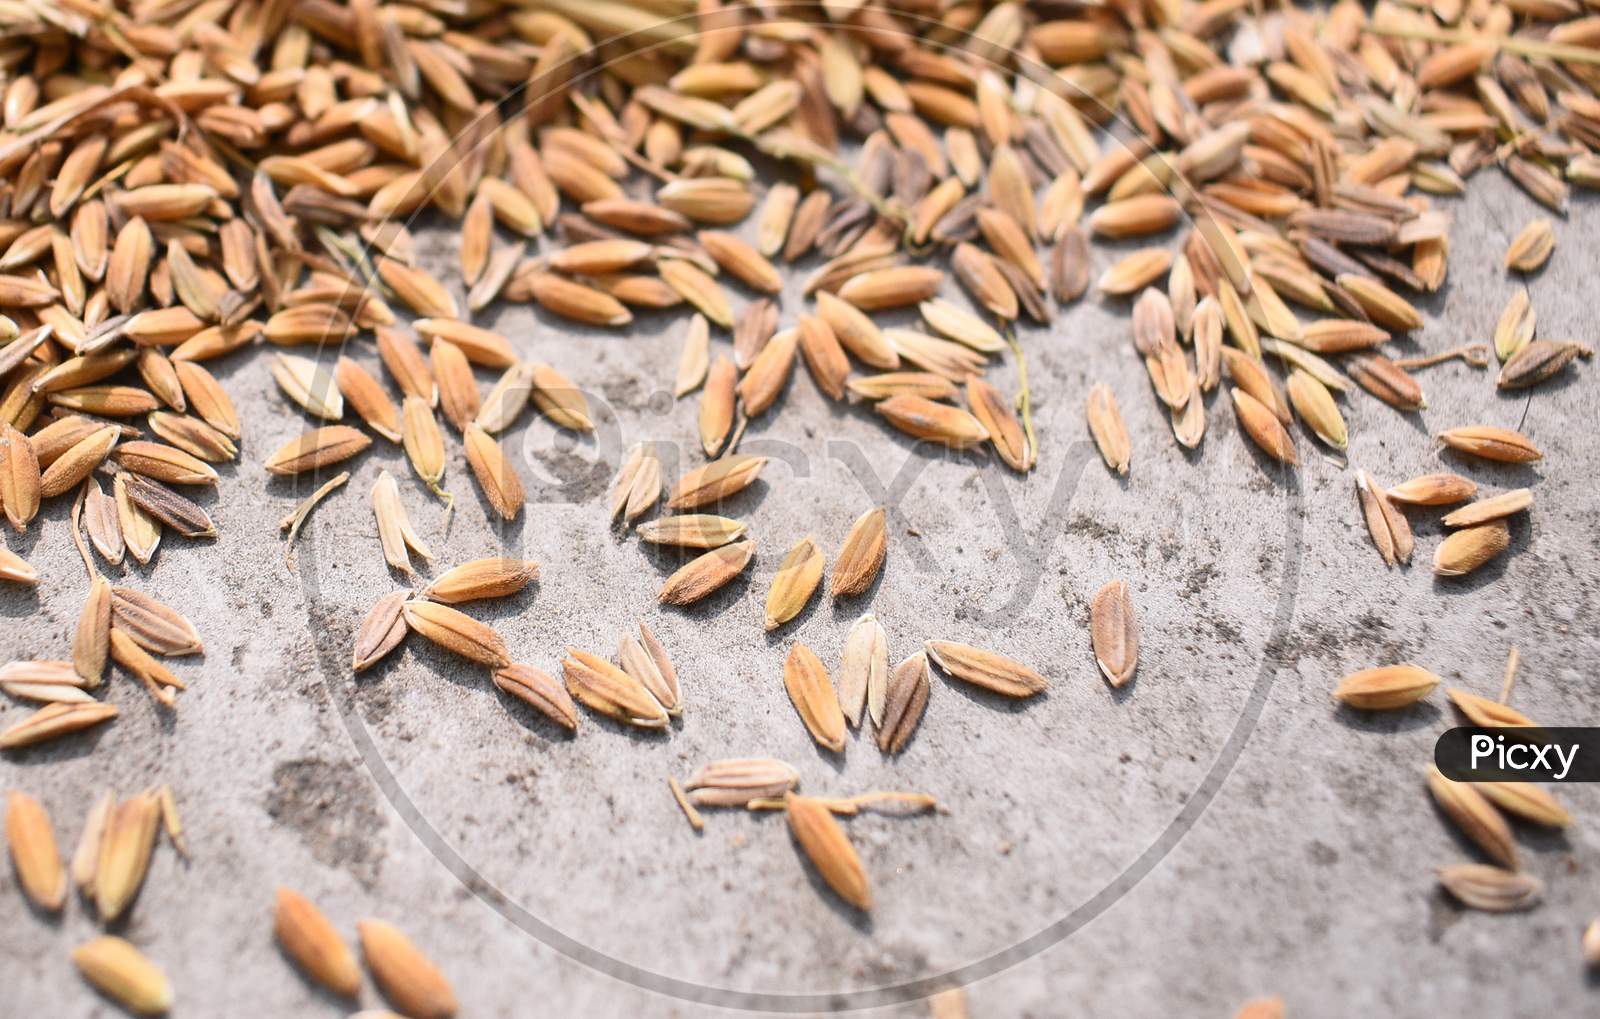 Closeup Image Of Paddy Seeds Spread In The Ground To Get It Dry.